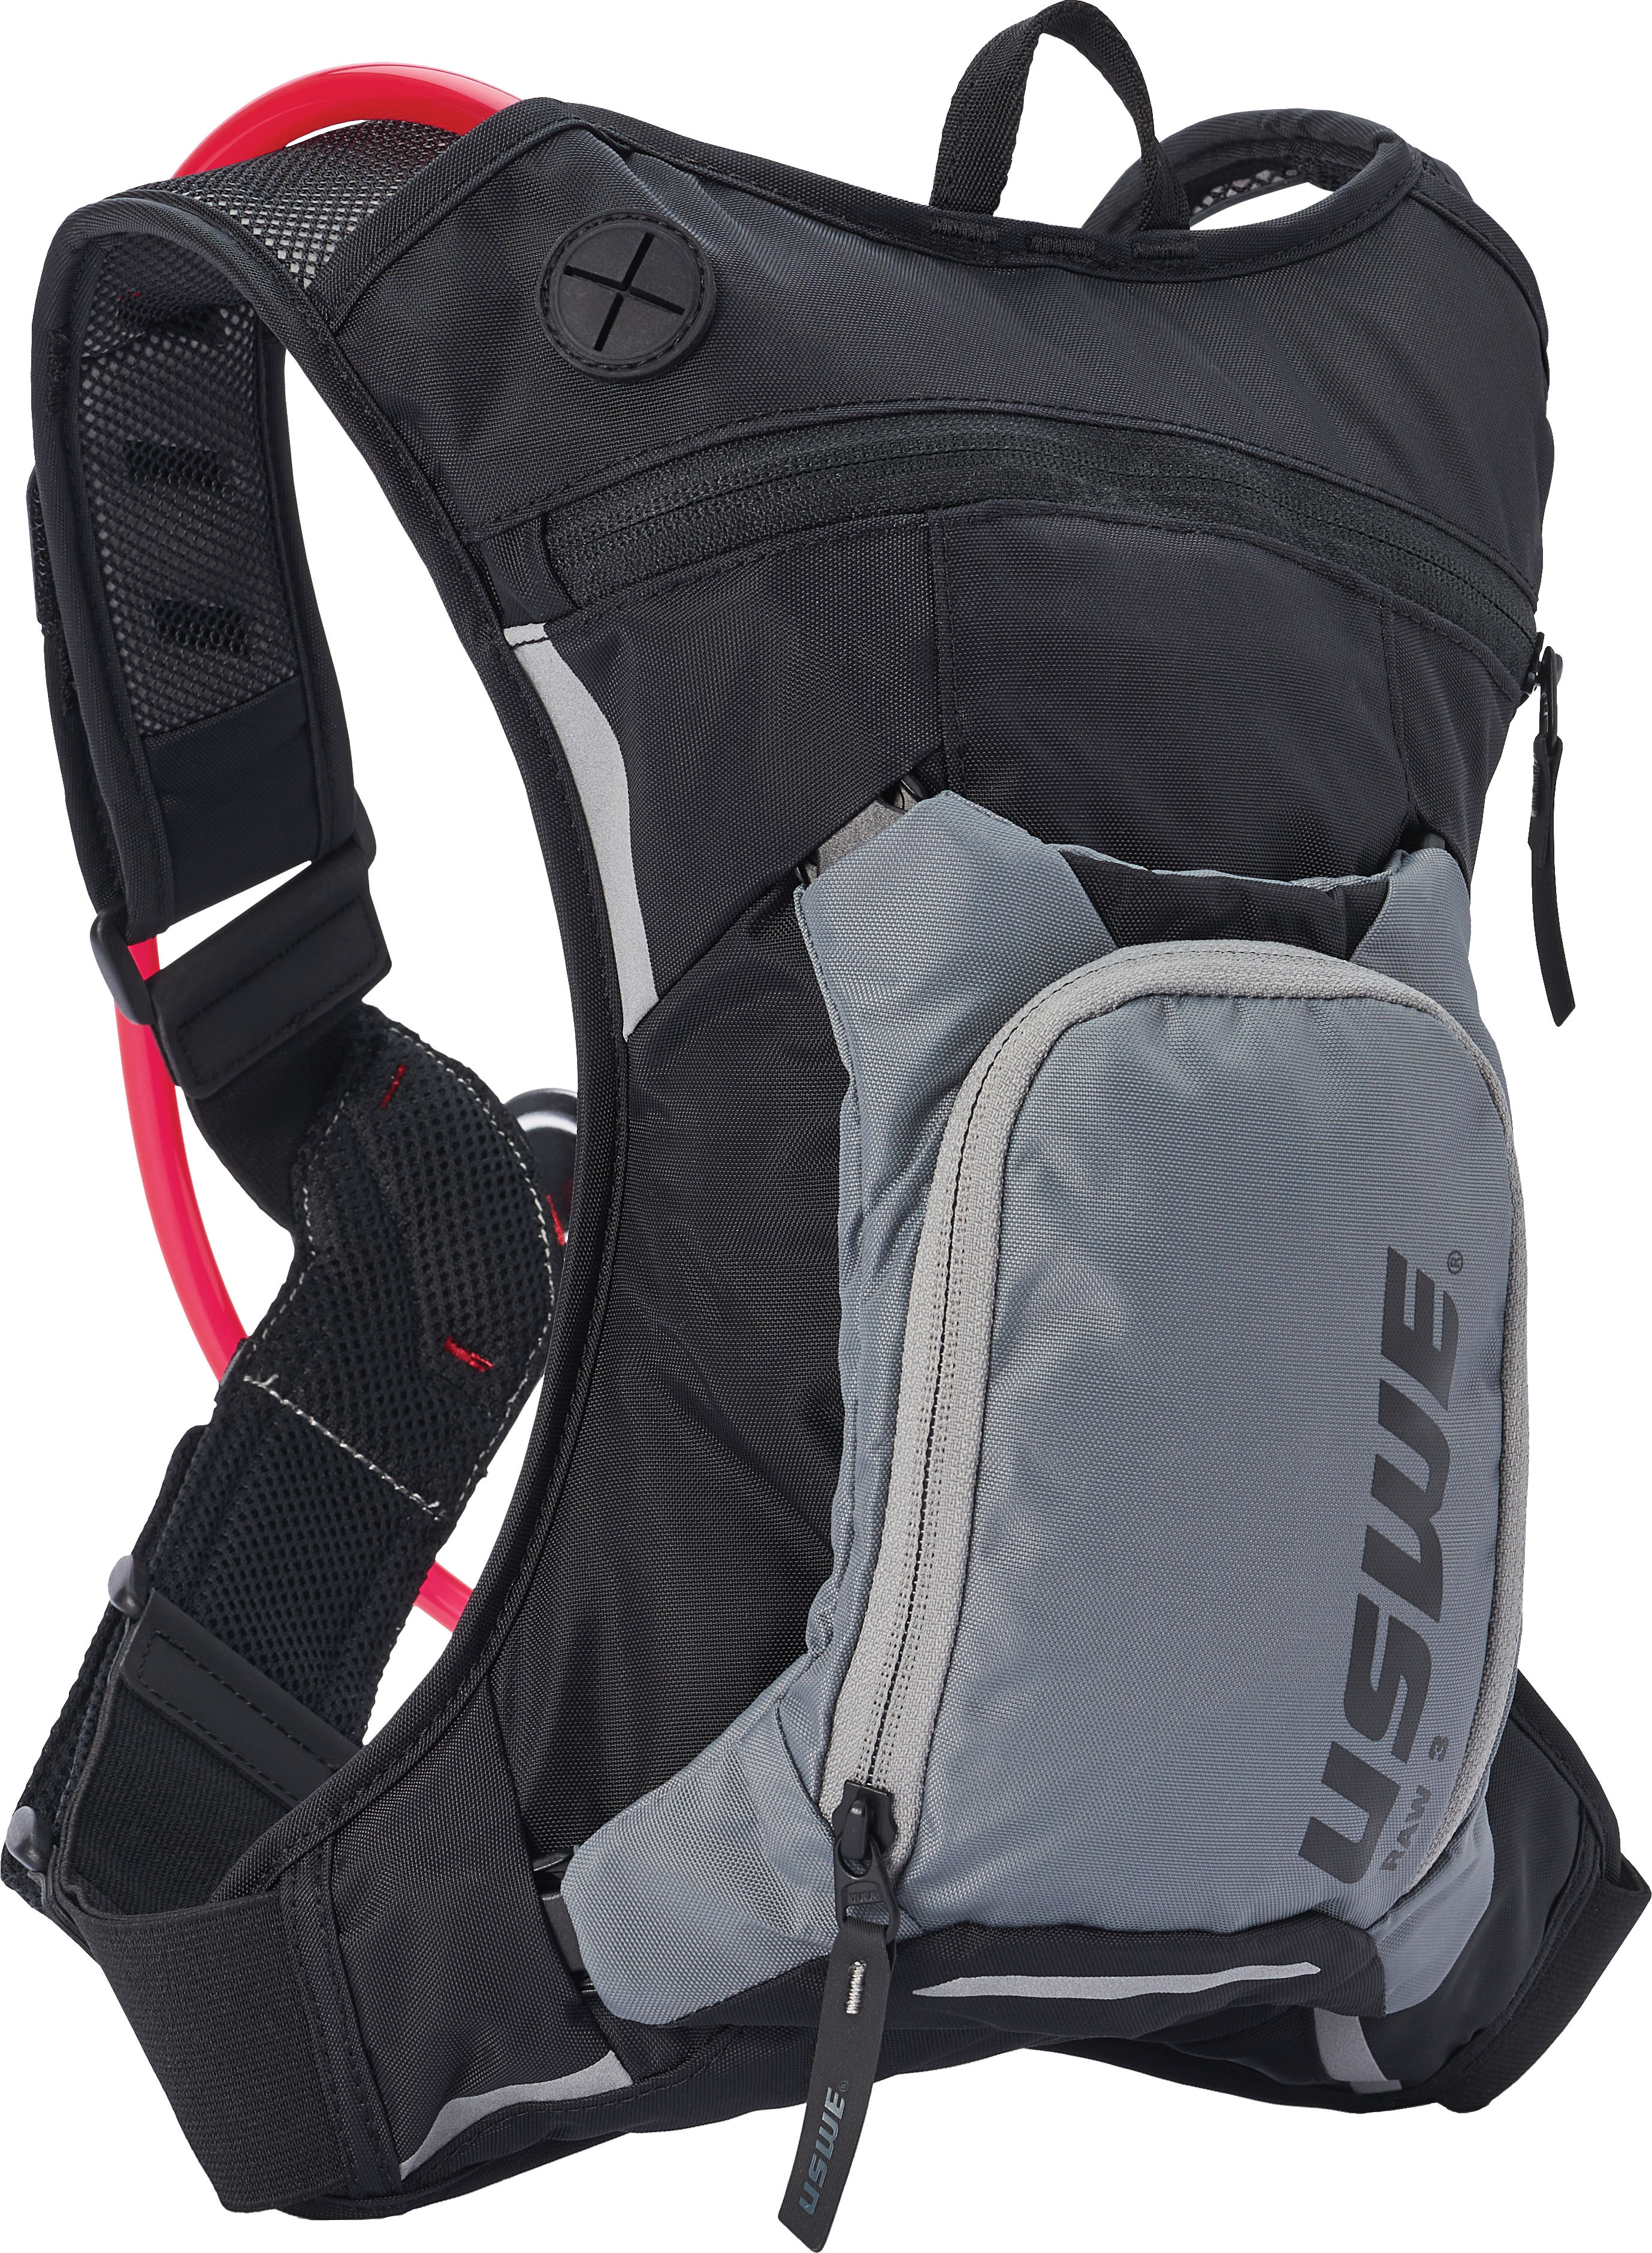 Carbon Black Raw 3 2.0L Hydration Pack w/ Plug-n-Play Tube - Click Image to Close